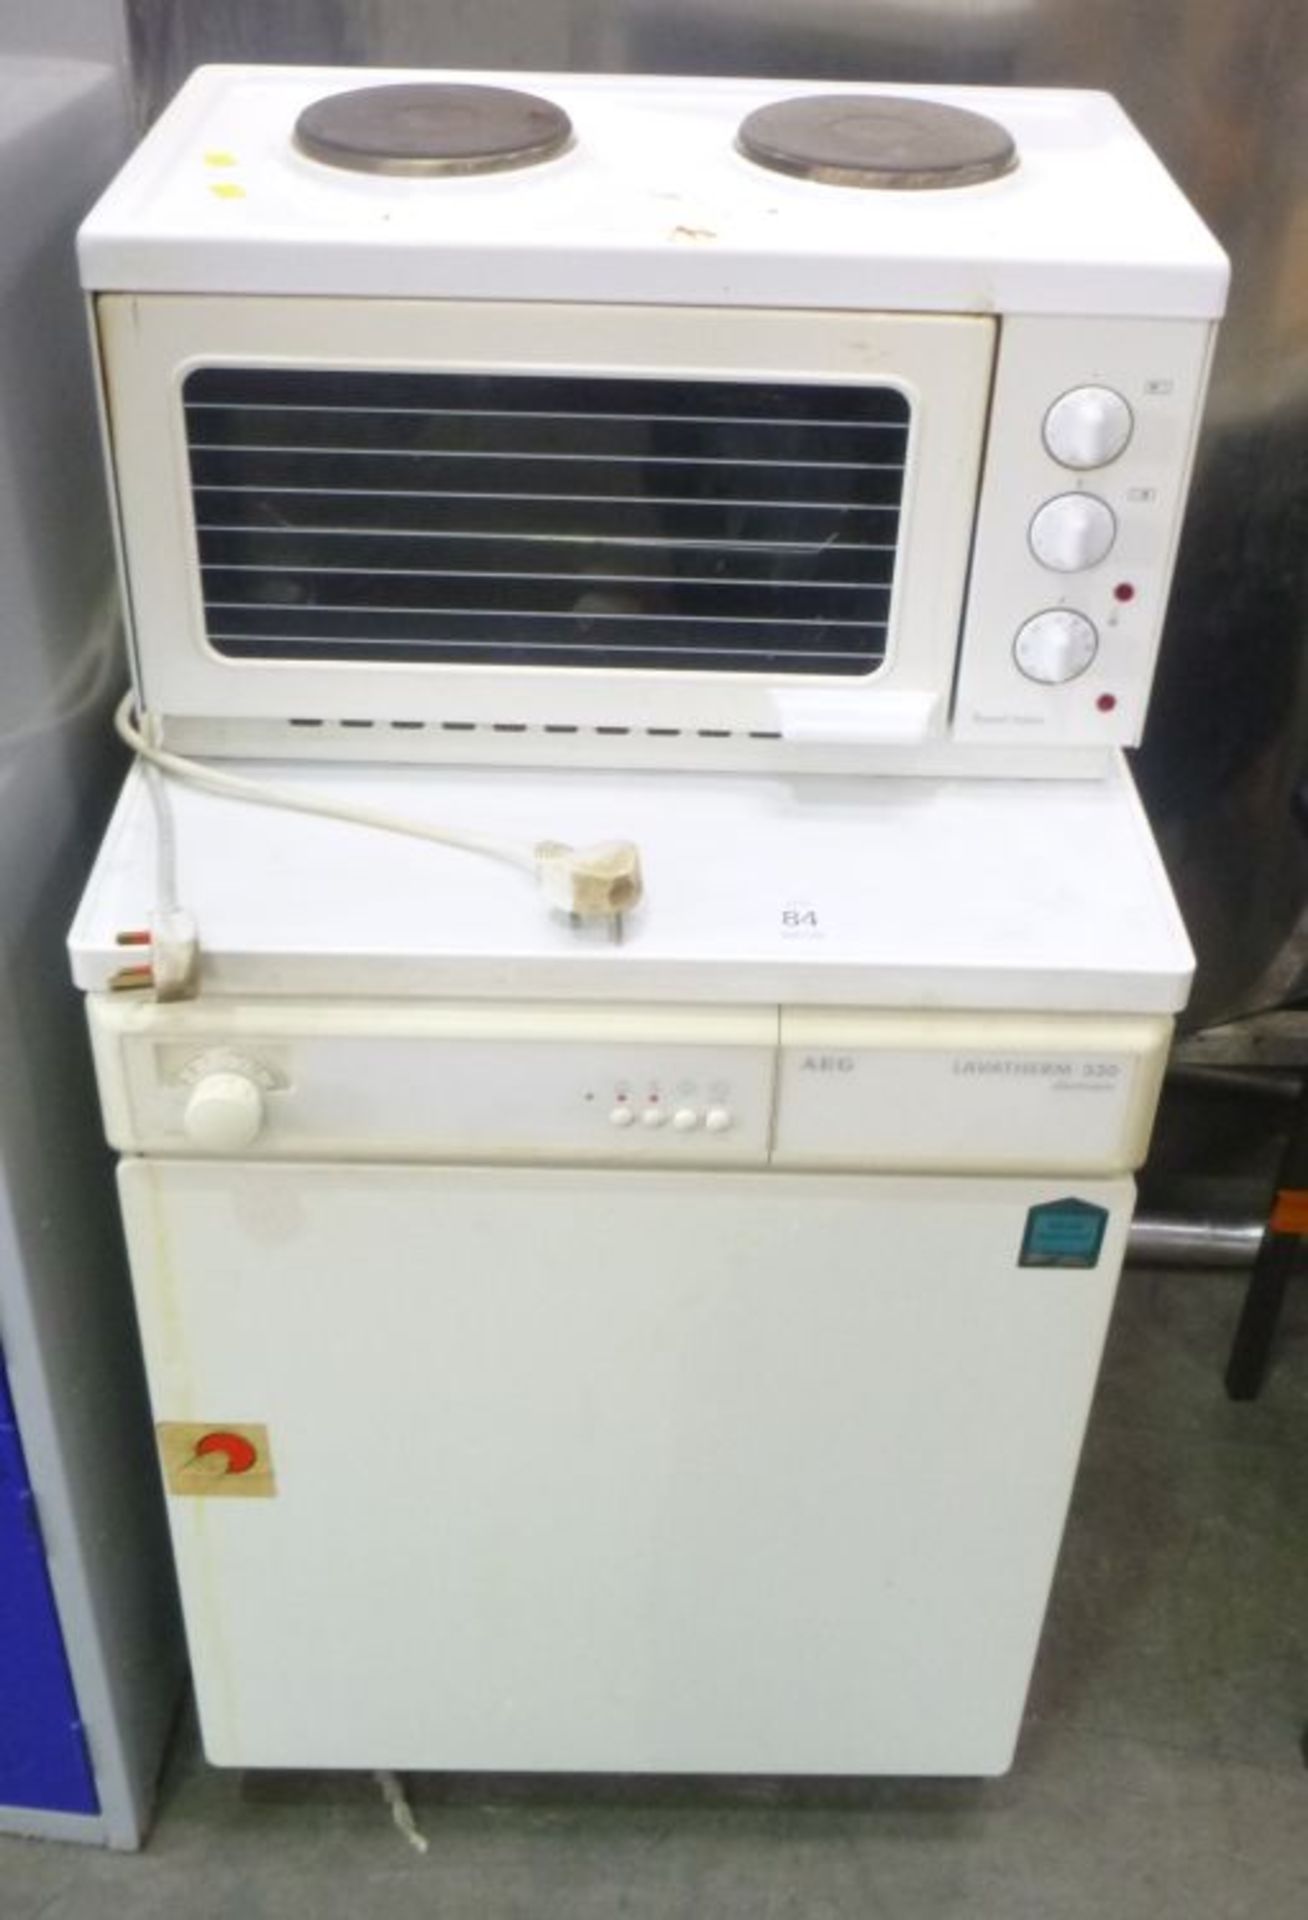 An AEG Lavatherm 330 Dryer c/w Russell Hobbs Microwave. Please note there is a £5 plus Vat lift